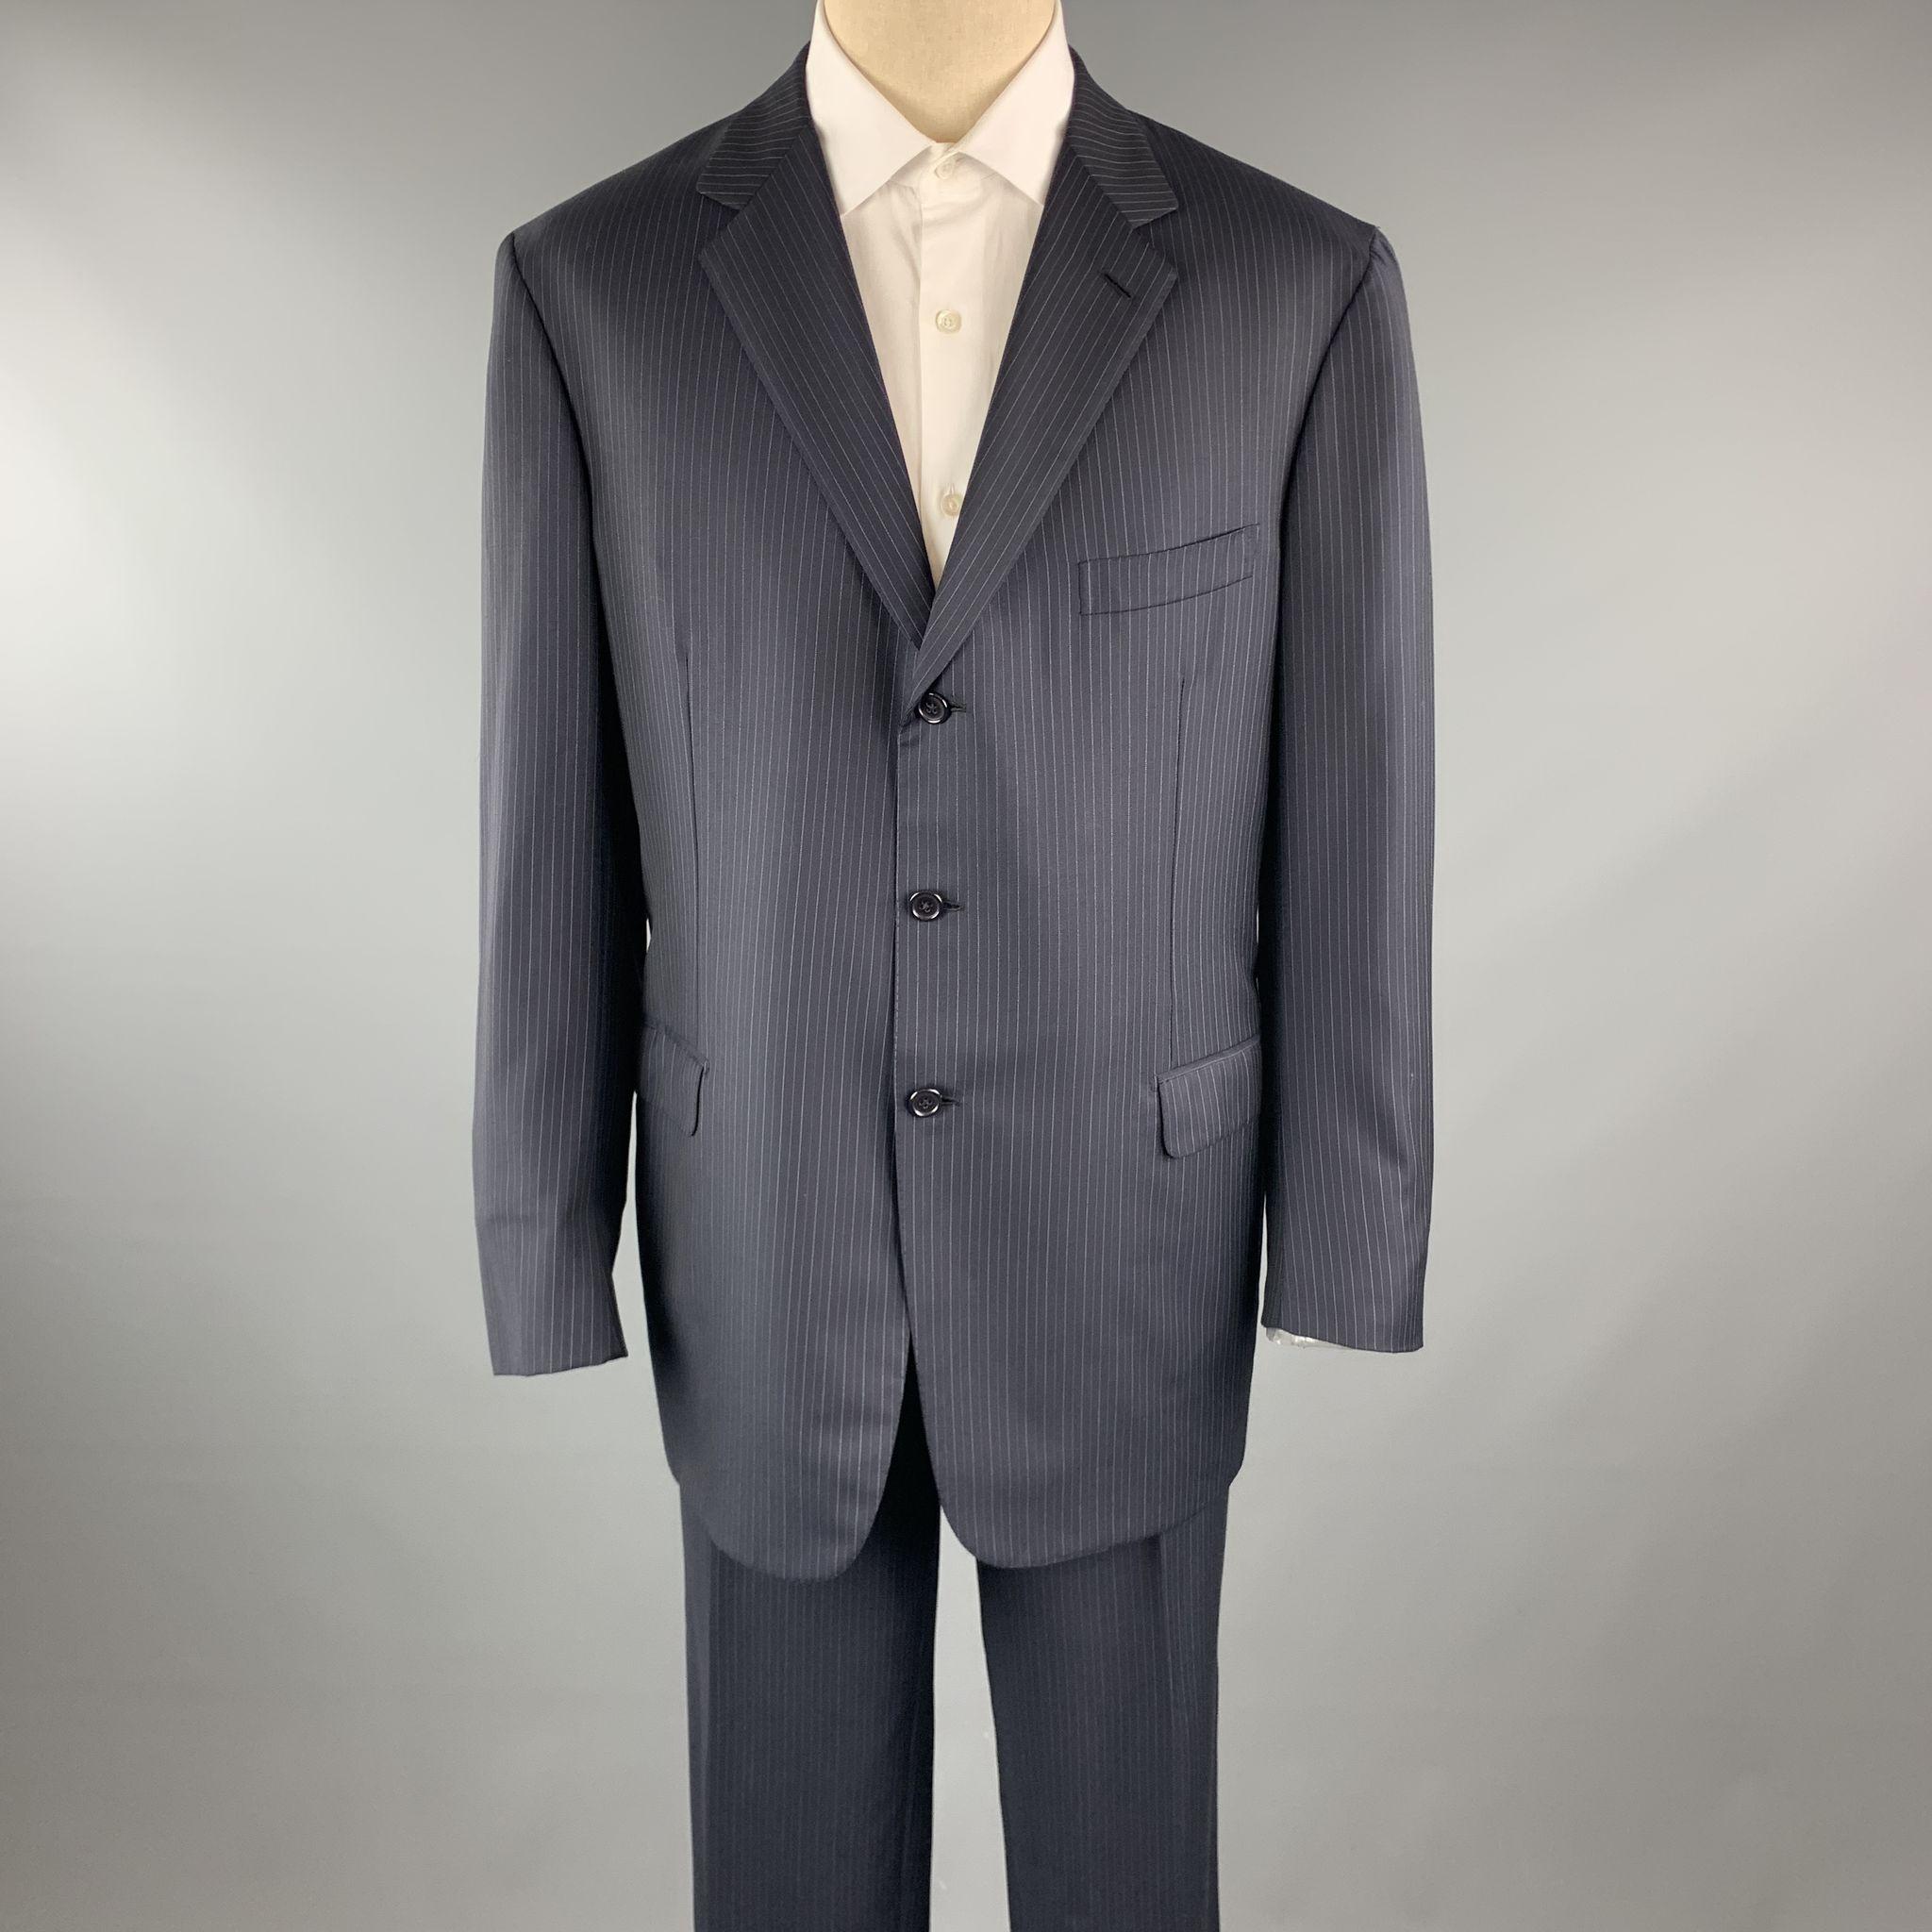 BRIONI suit comes in a navy stripe wool and includes a single breasted, three button sport coat with a notch lapel and matching front trousers. Made in Italy.

Excellent Pre-Owned Condition.
Marked: 46

Measurements:

-Jacket
Shoulder: 19.5